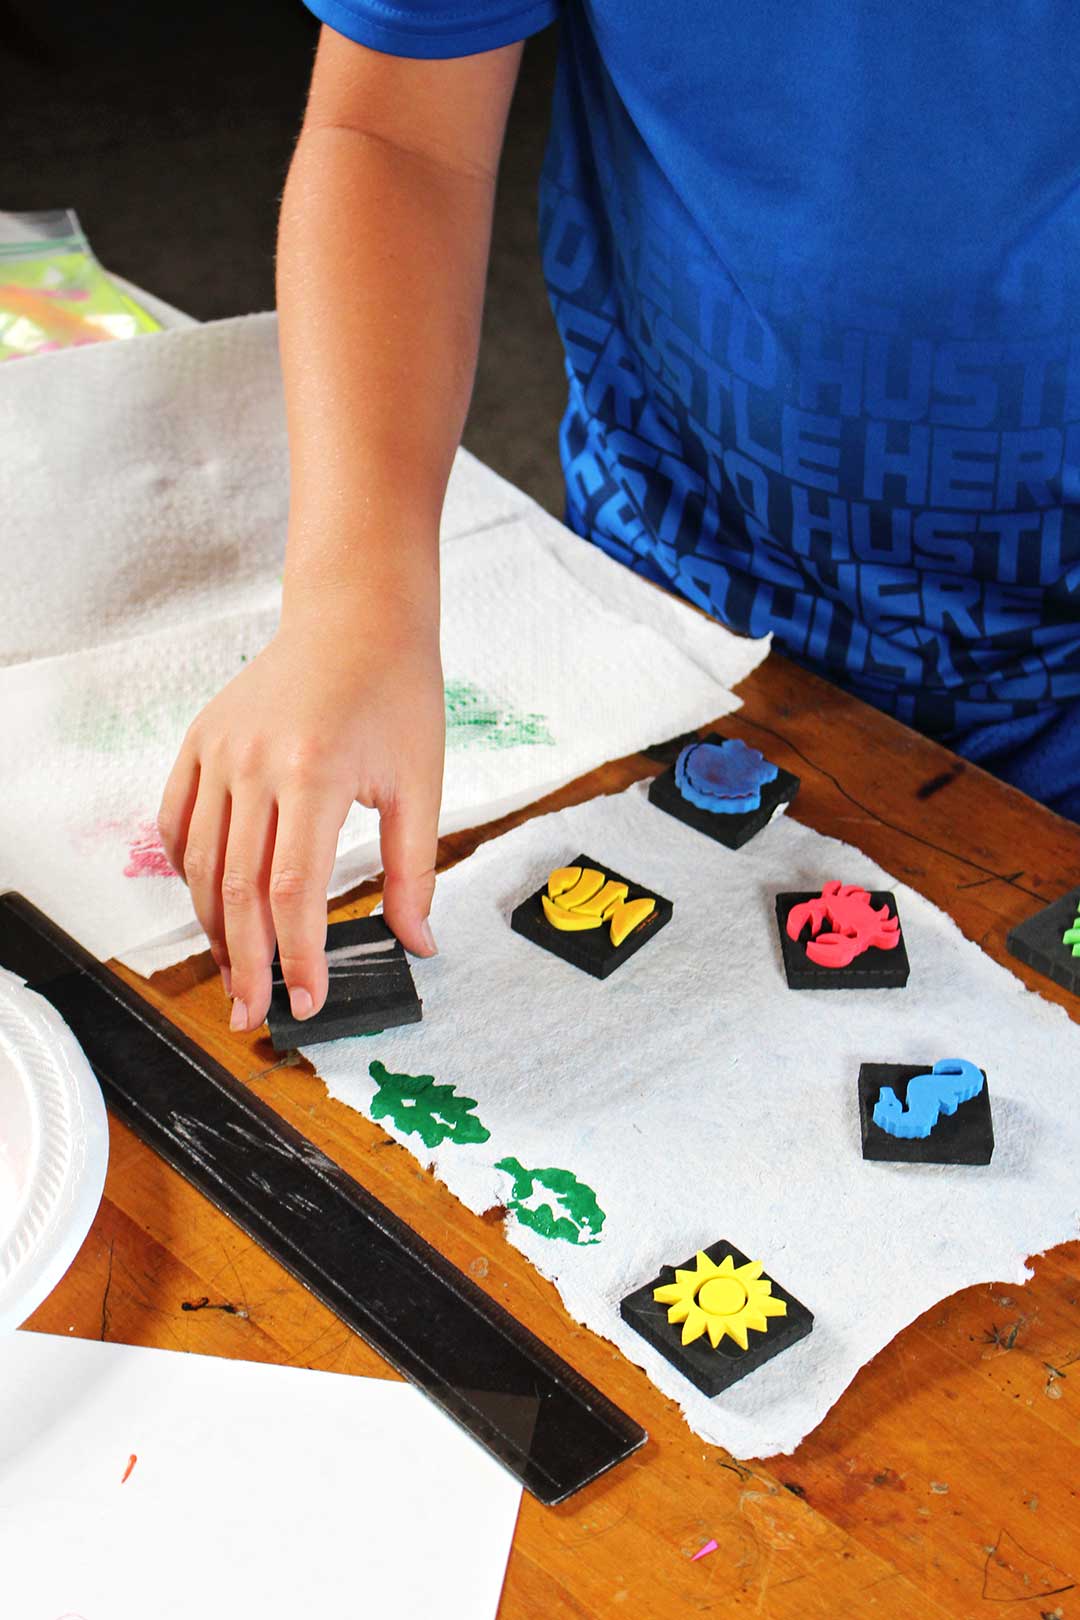 Child in blue shirt stamping shapes on homemade paper.